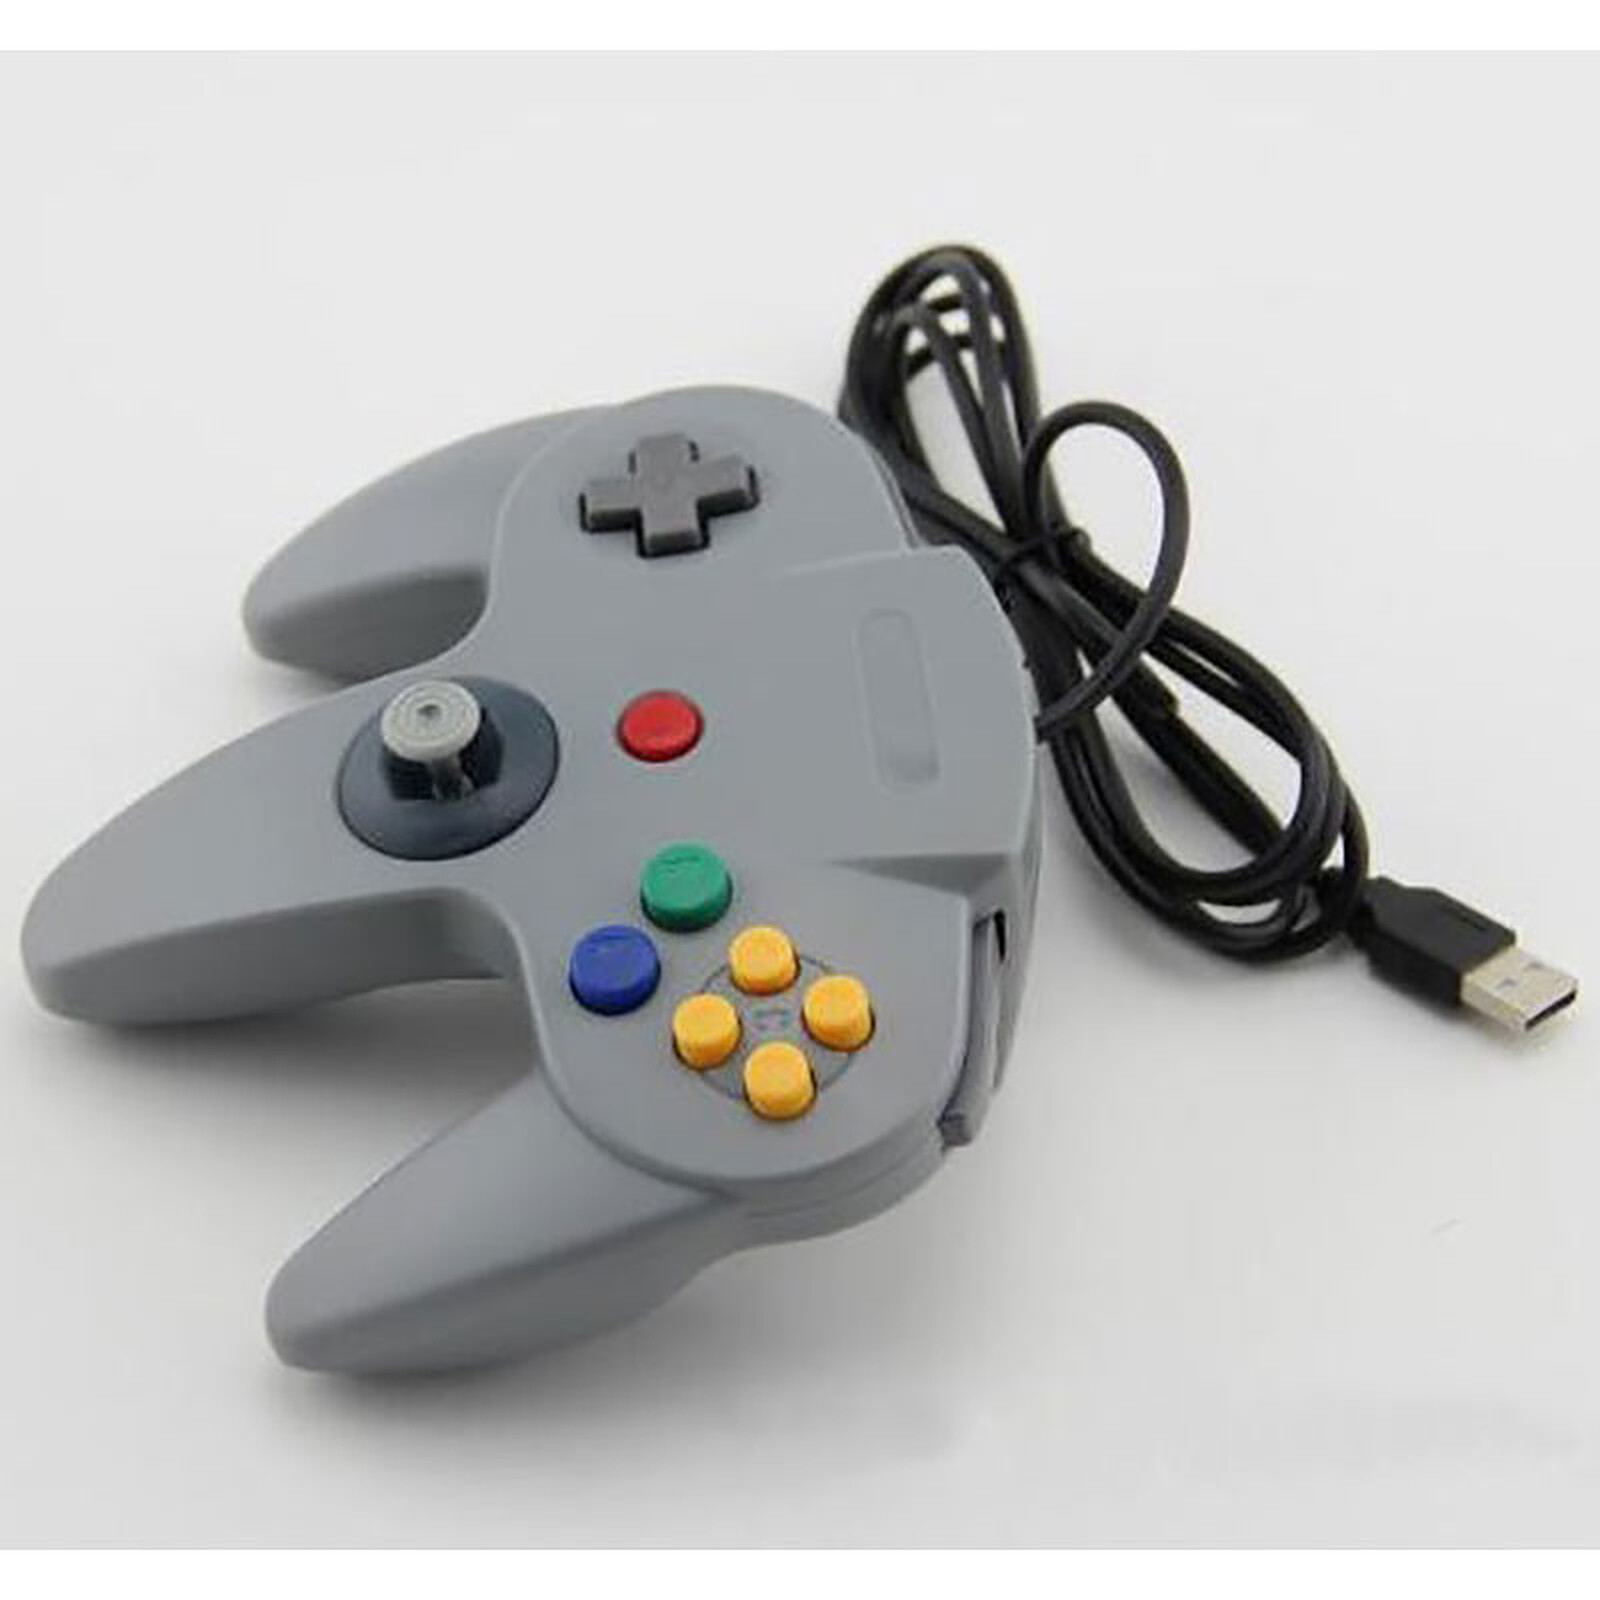 USB controller for rtrogaming (Nintendo 64)